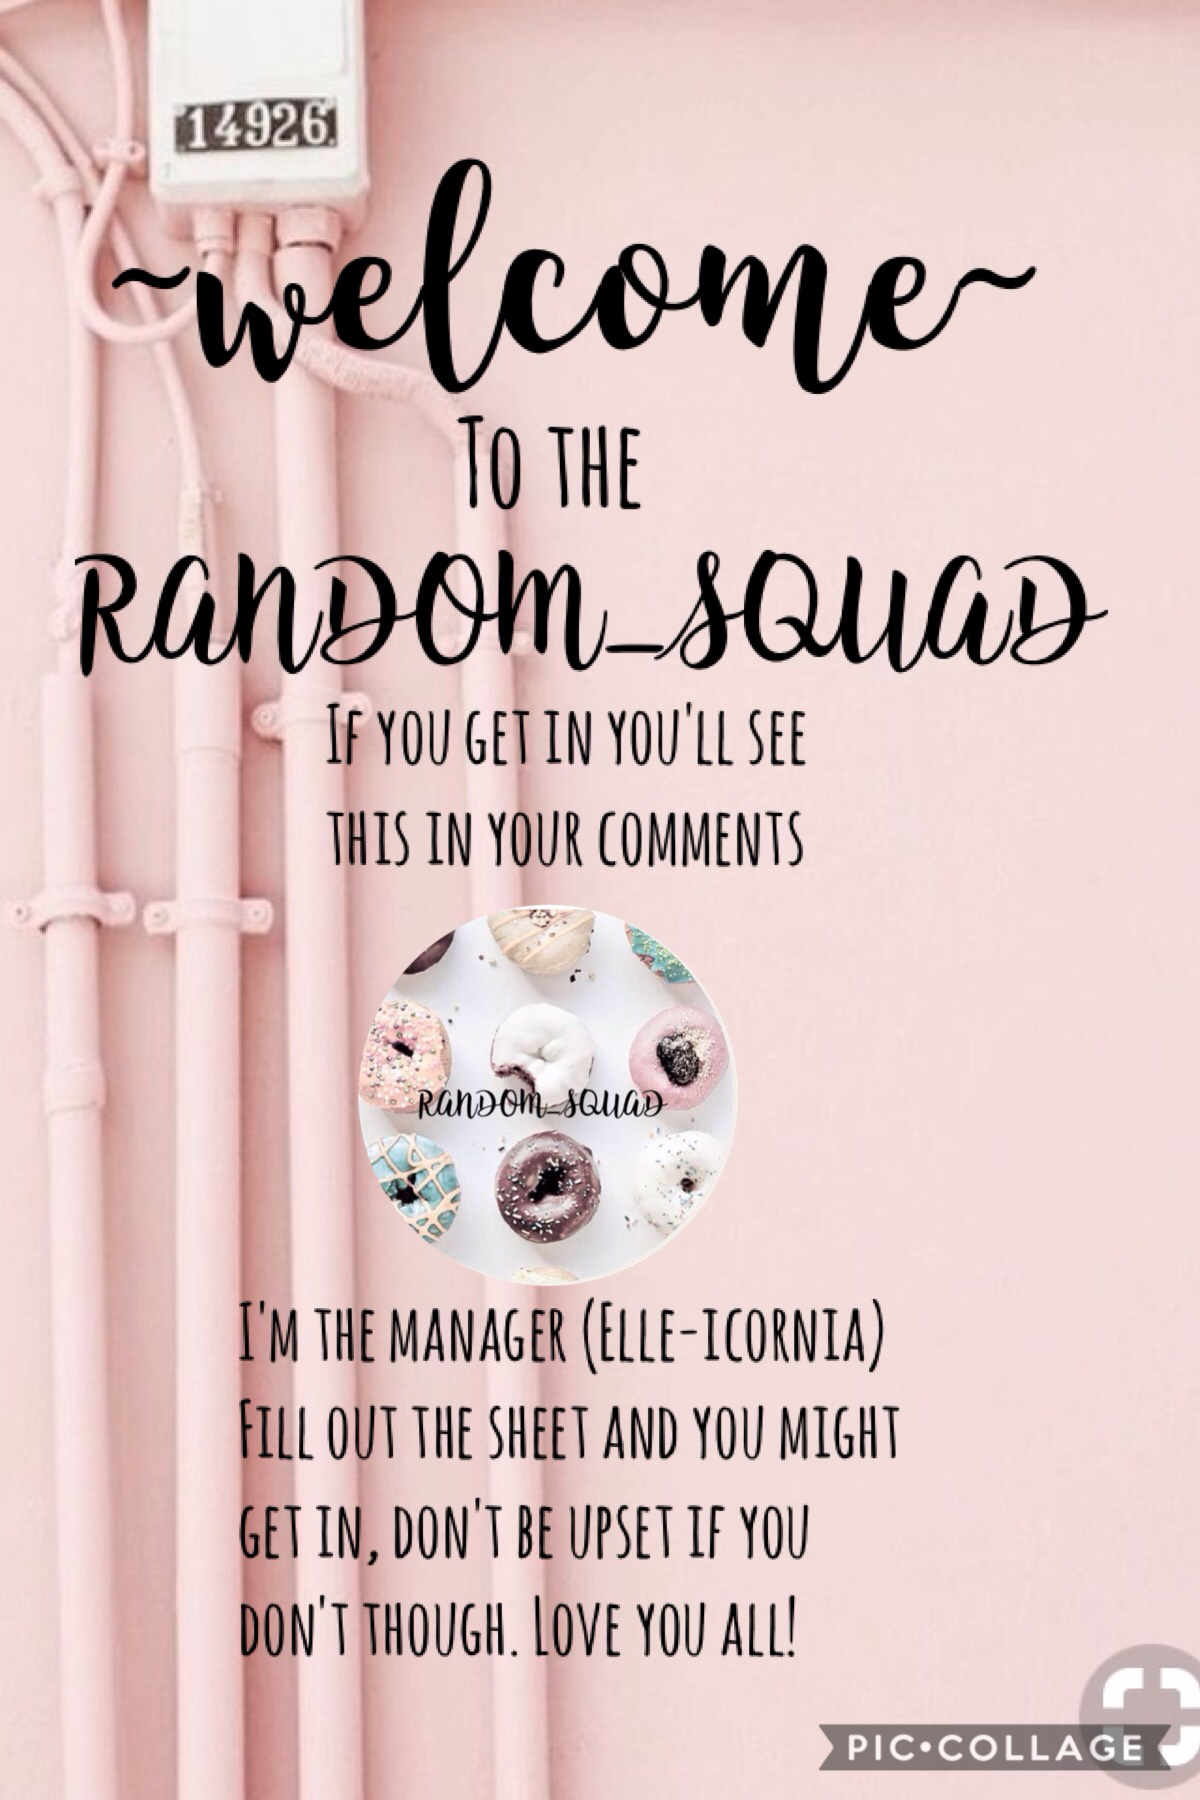 ~TAP~
This is a very random squad called the RANDOM_SQUAD made by me (Elle-icornia)

🎉🎉🎉🎉